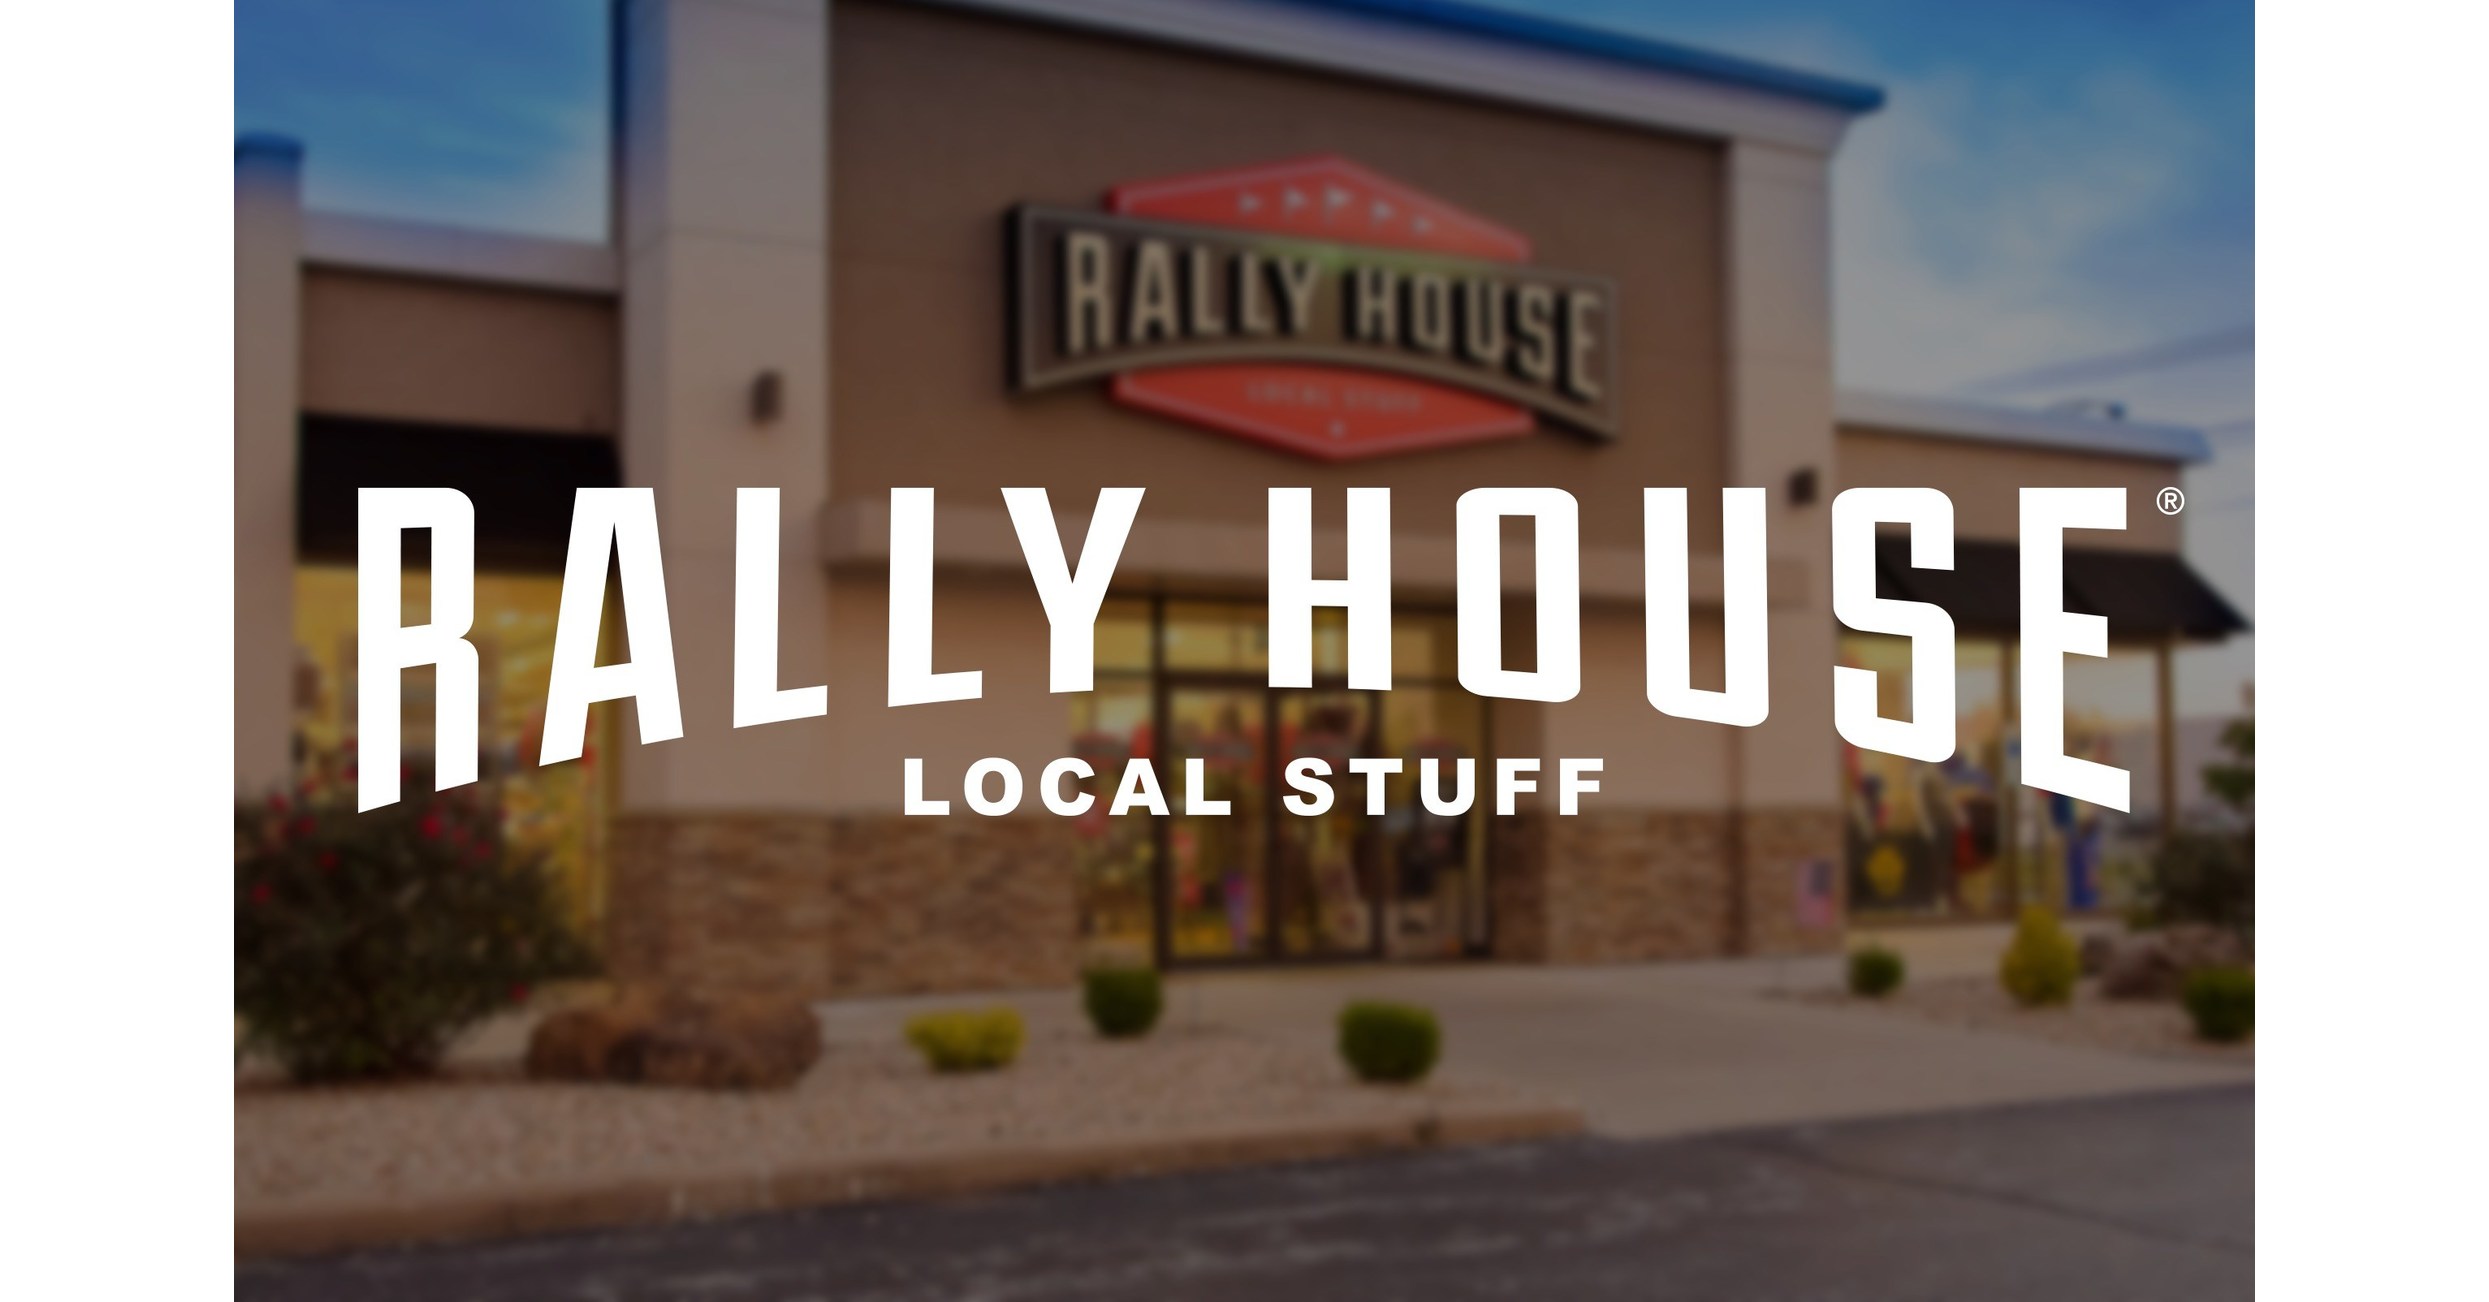 Rally House plans new store and job opportunities in Kansas City